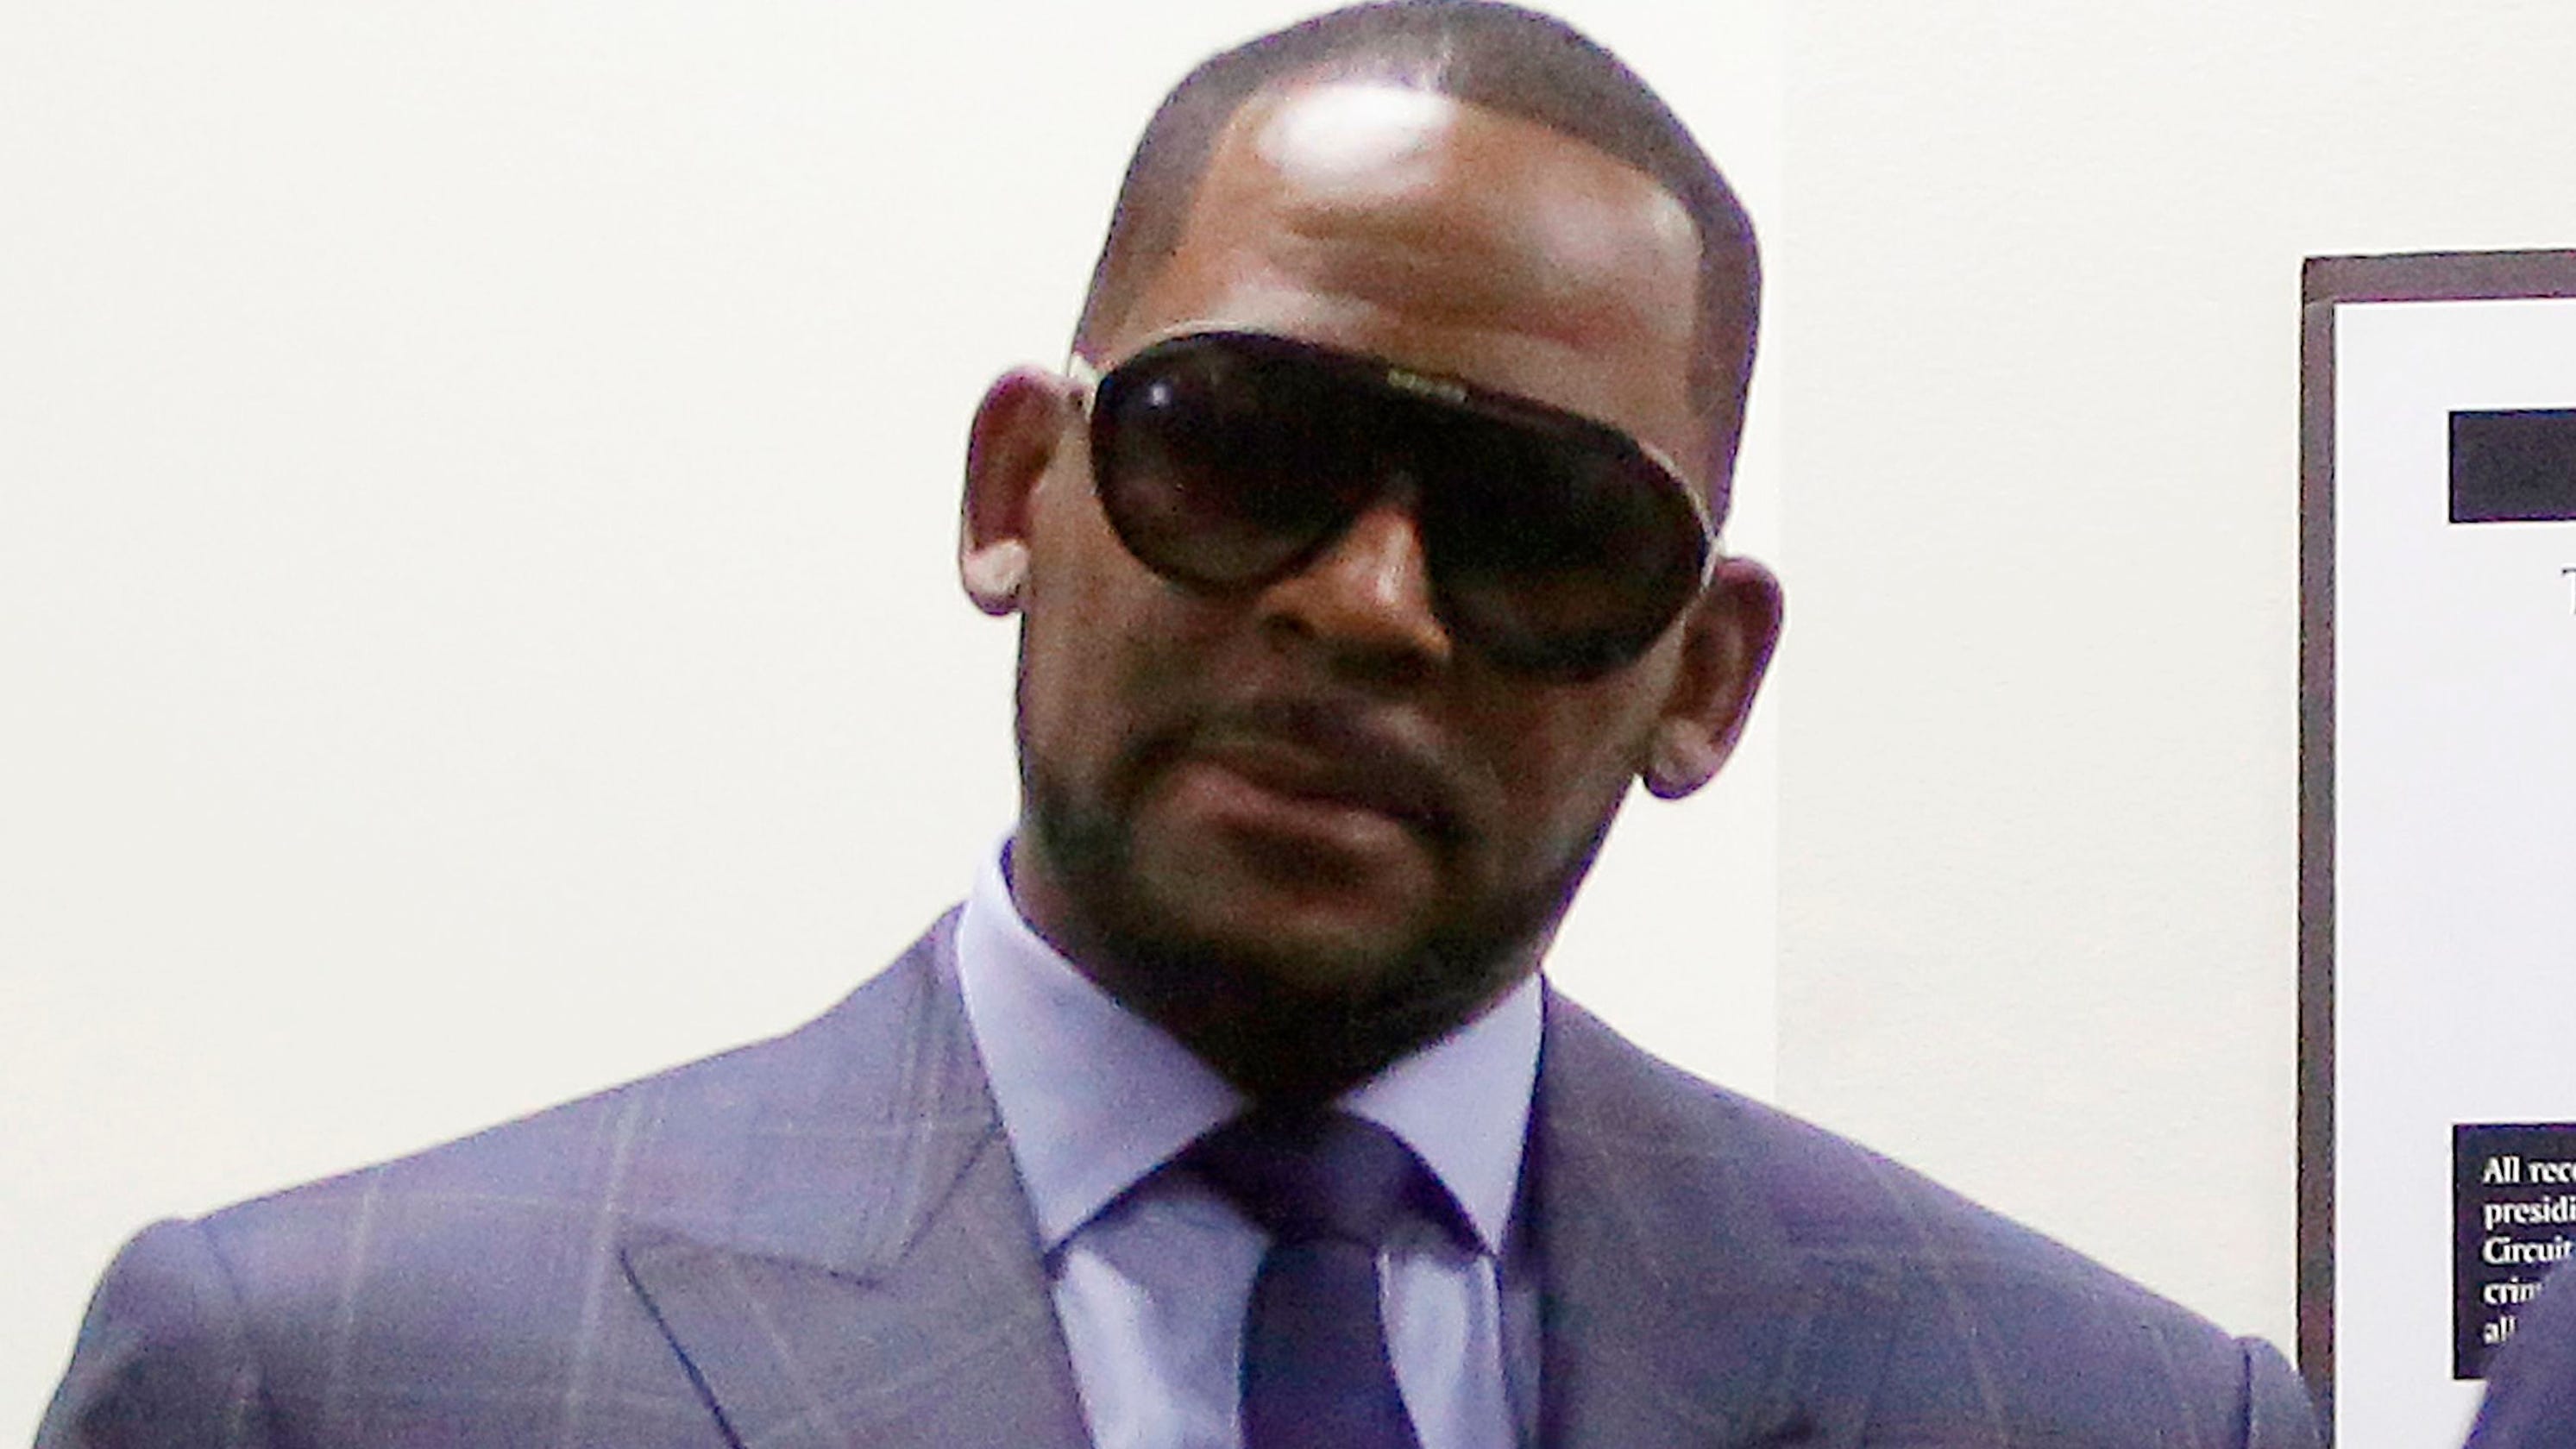 R. Kelly goes to court over child support after heated CBS interview2986 x 1680